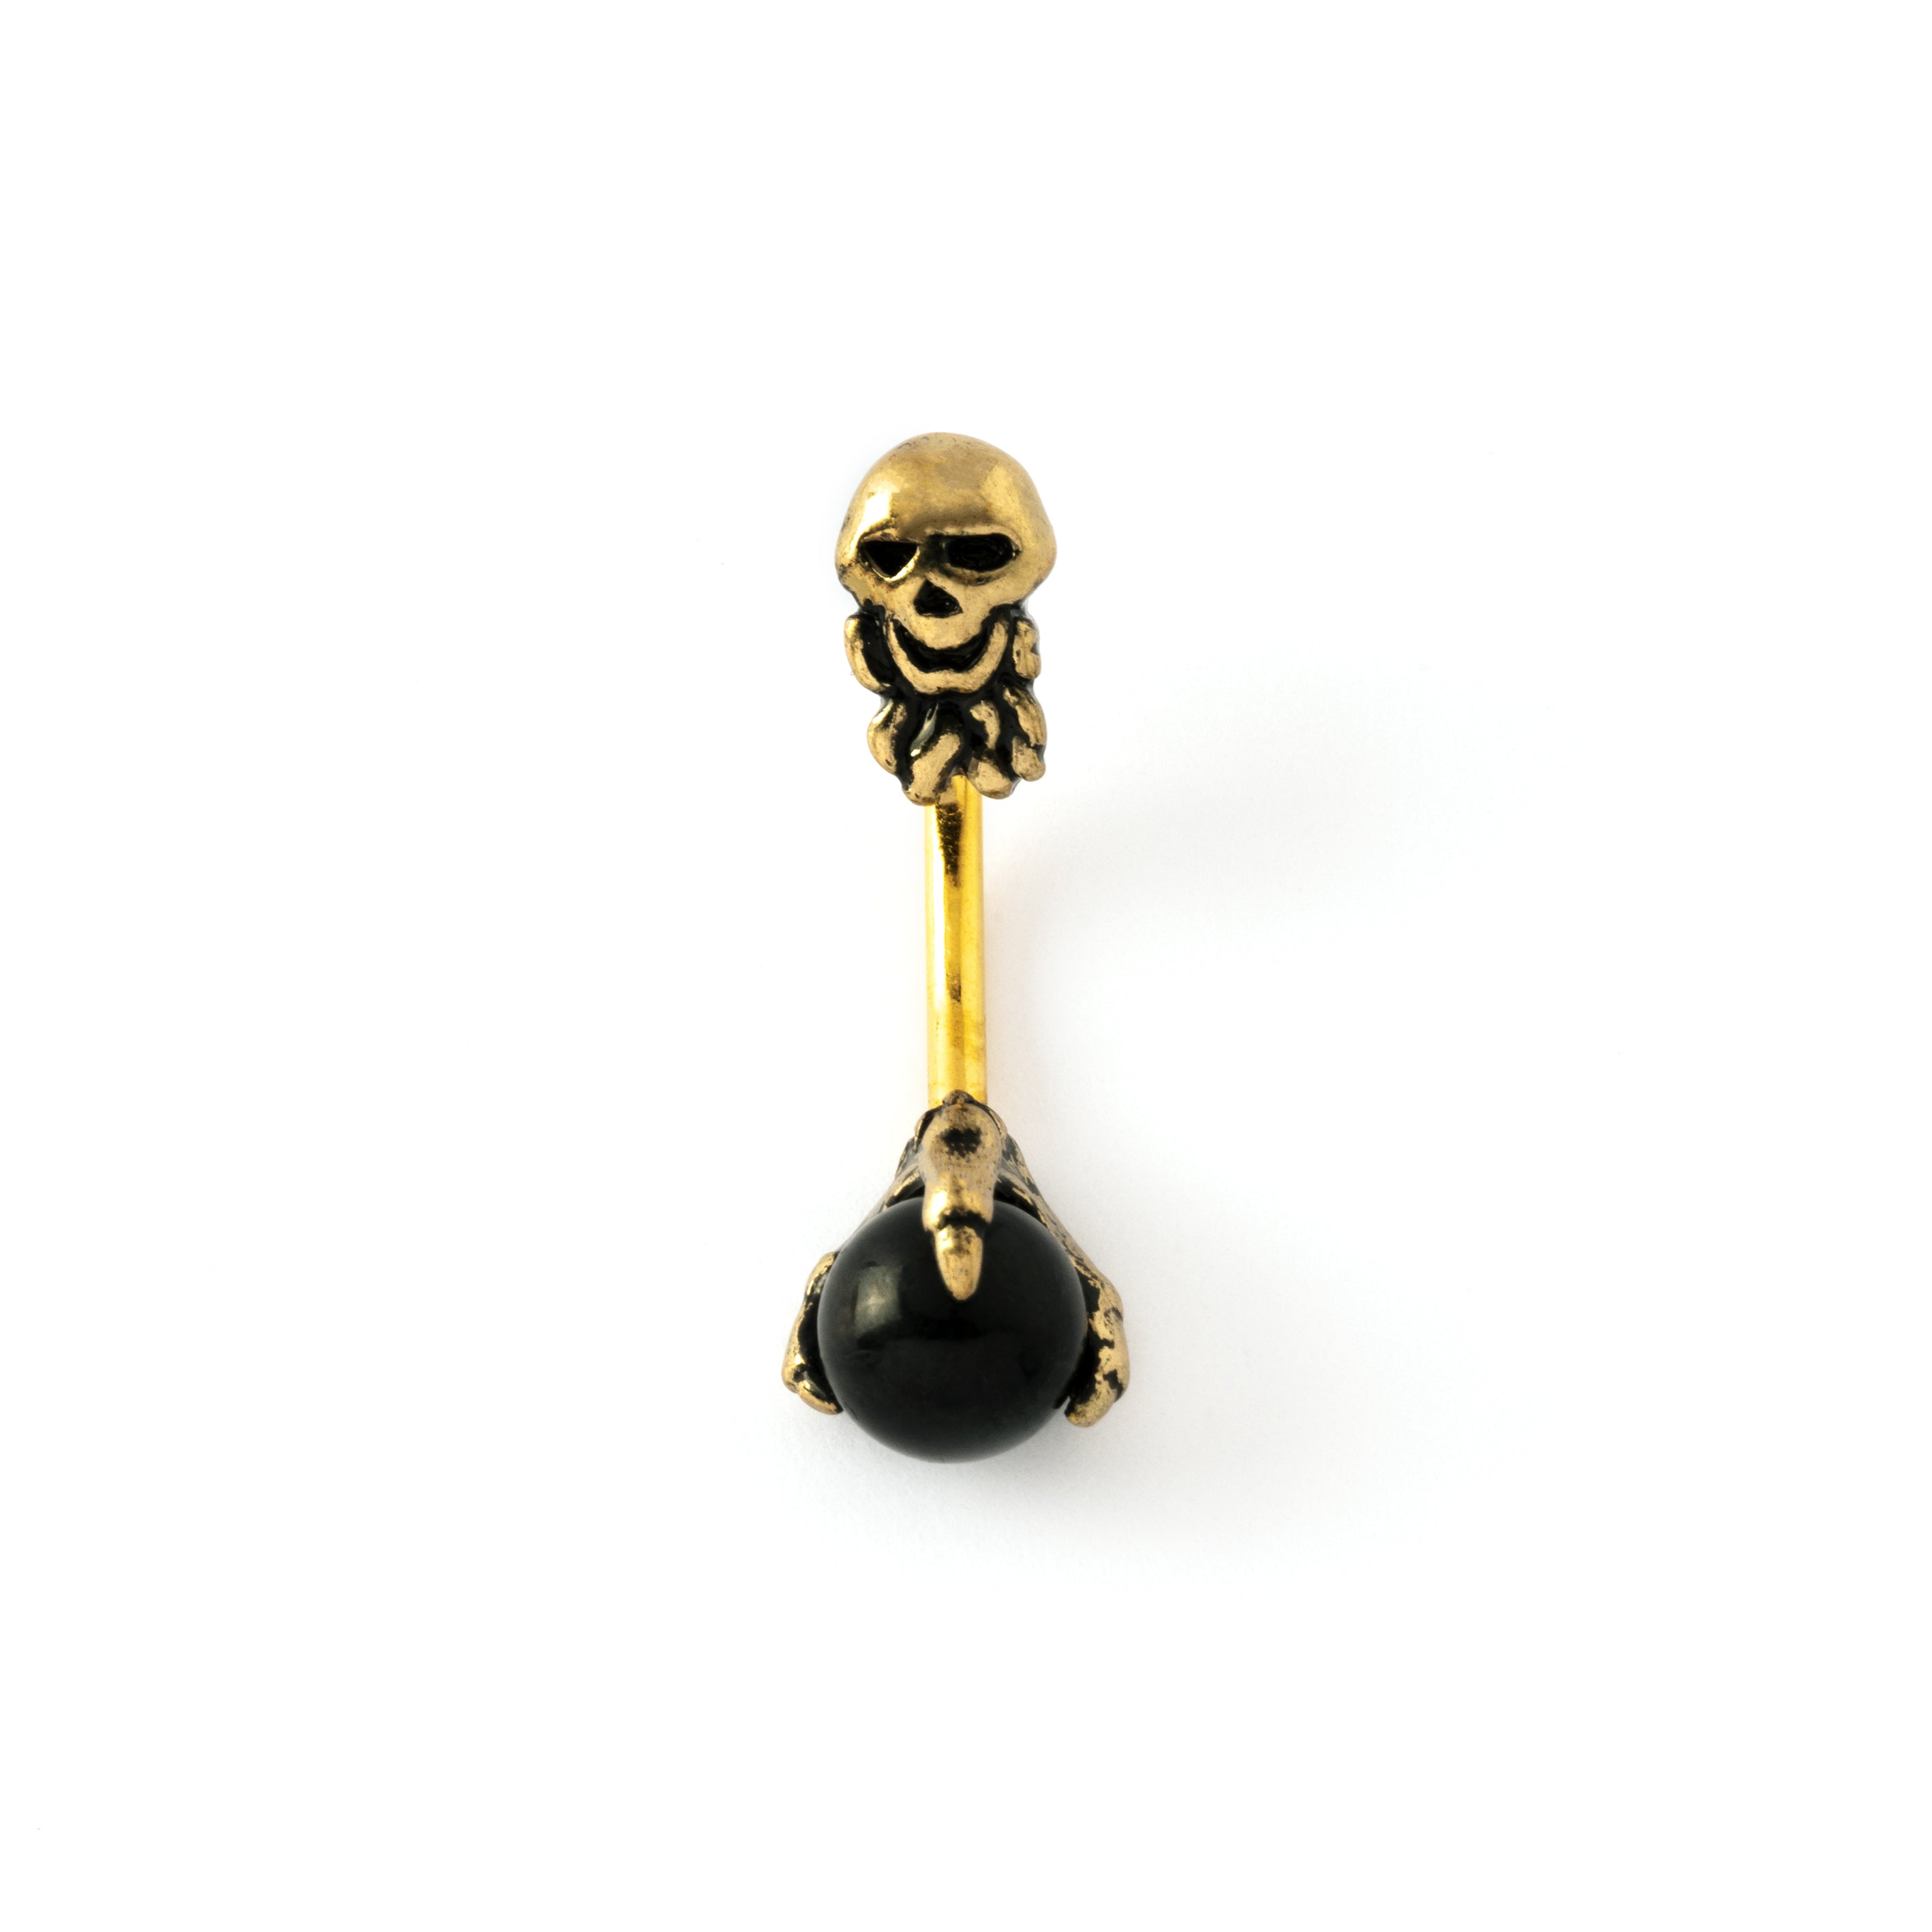 Golden-skull-belly-bar-with-claw